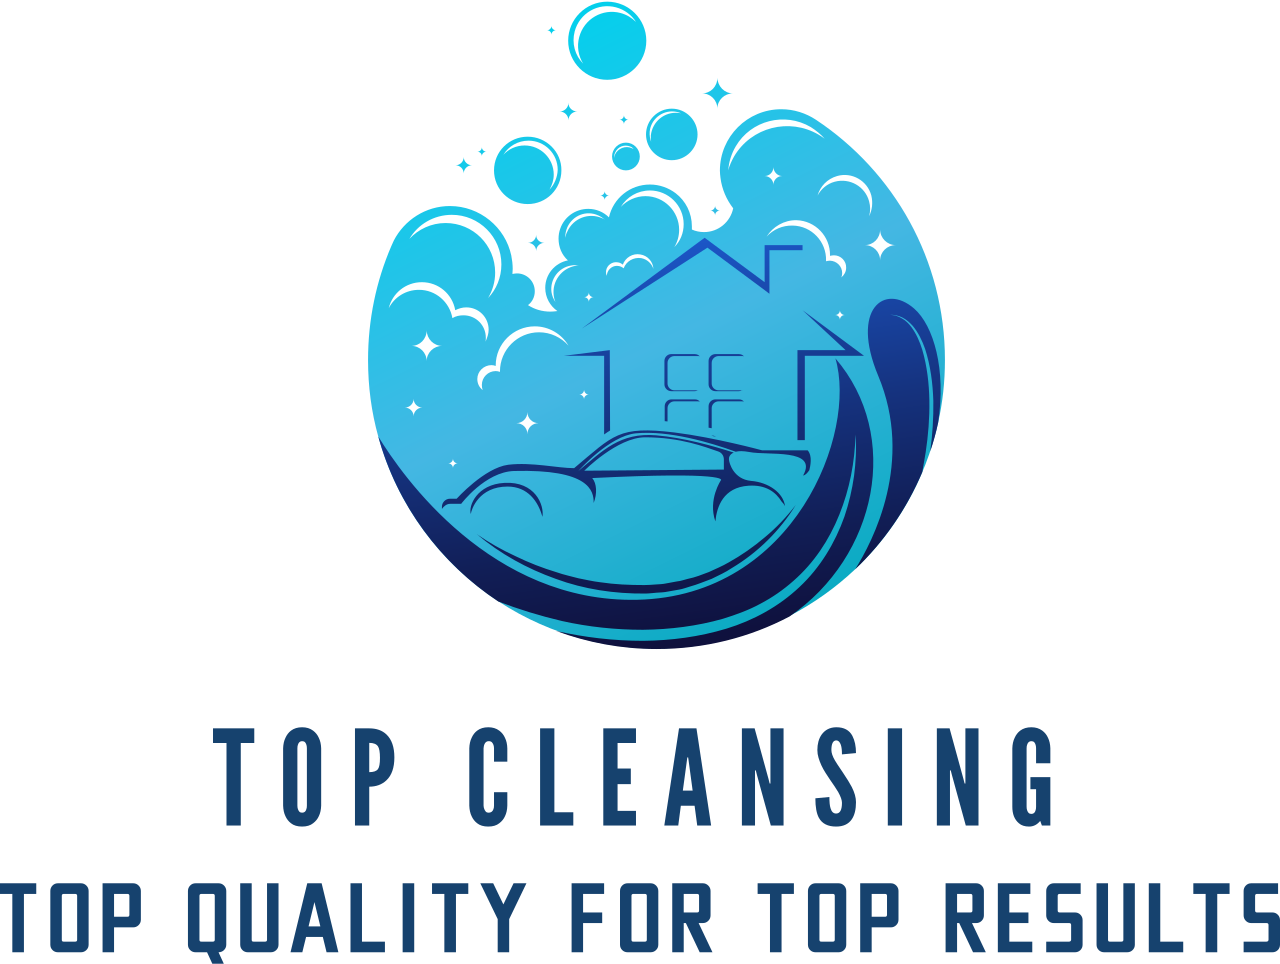 TOP CLEANSING 's logo